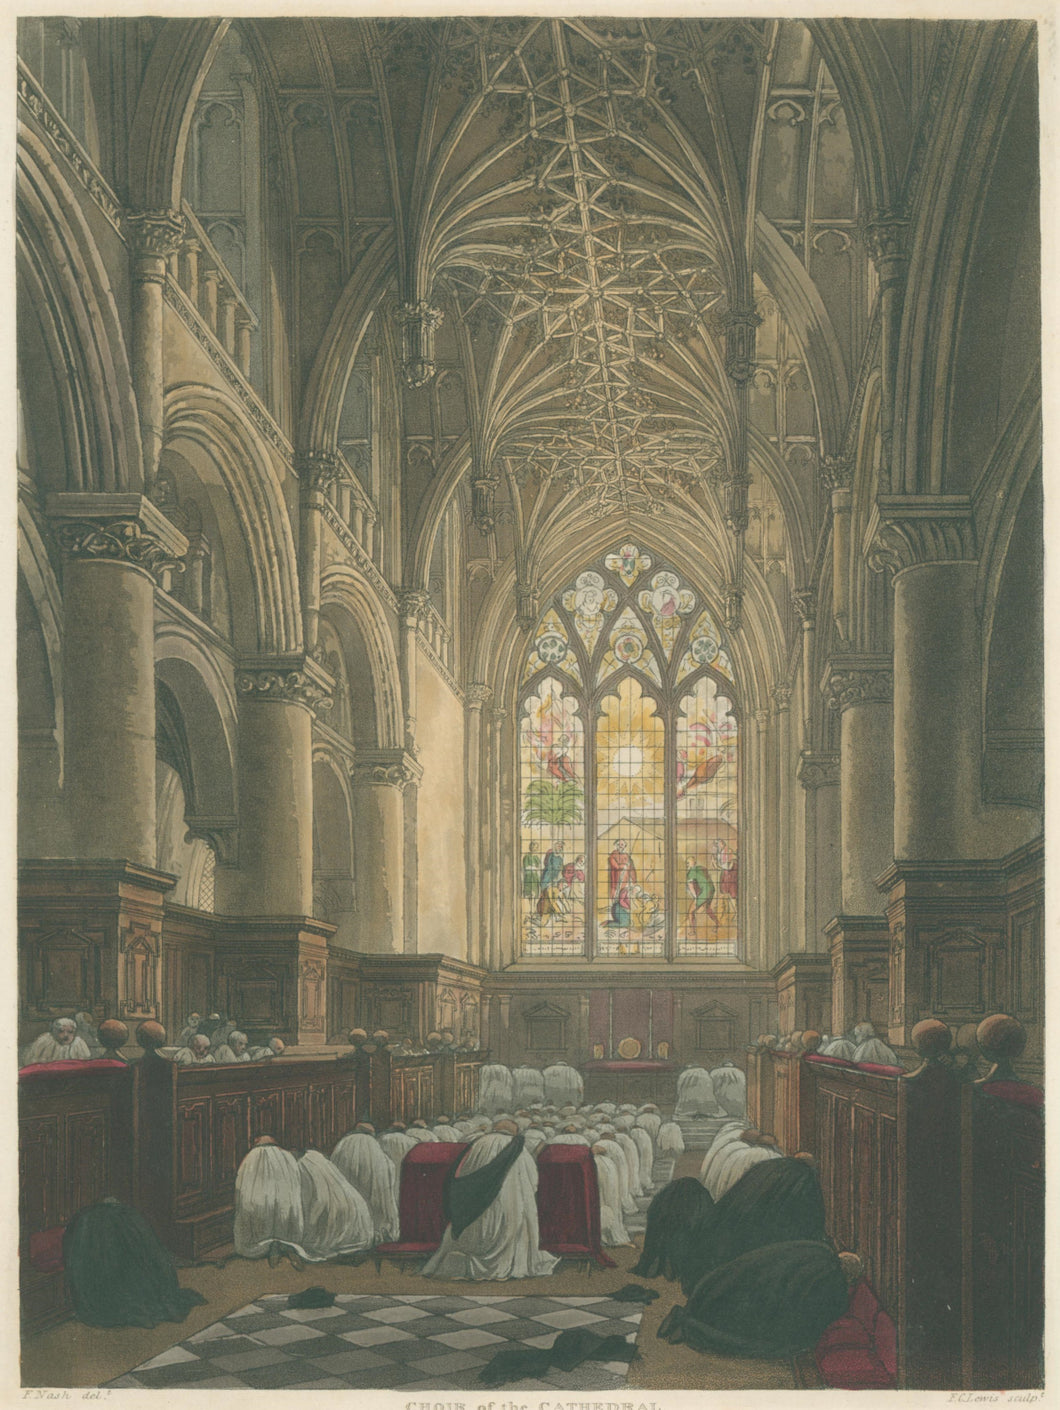 Nash, F.  “Choir of the [Christ Church] Cathedral”